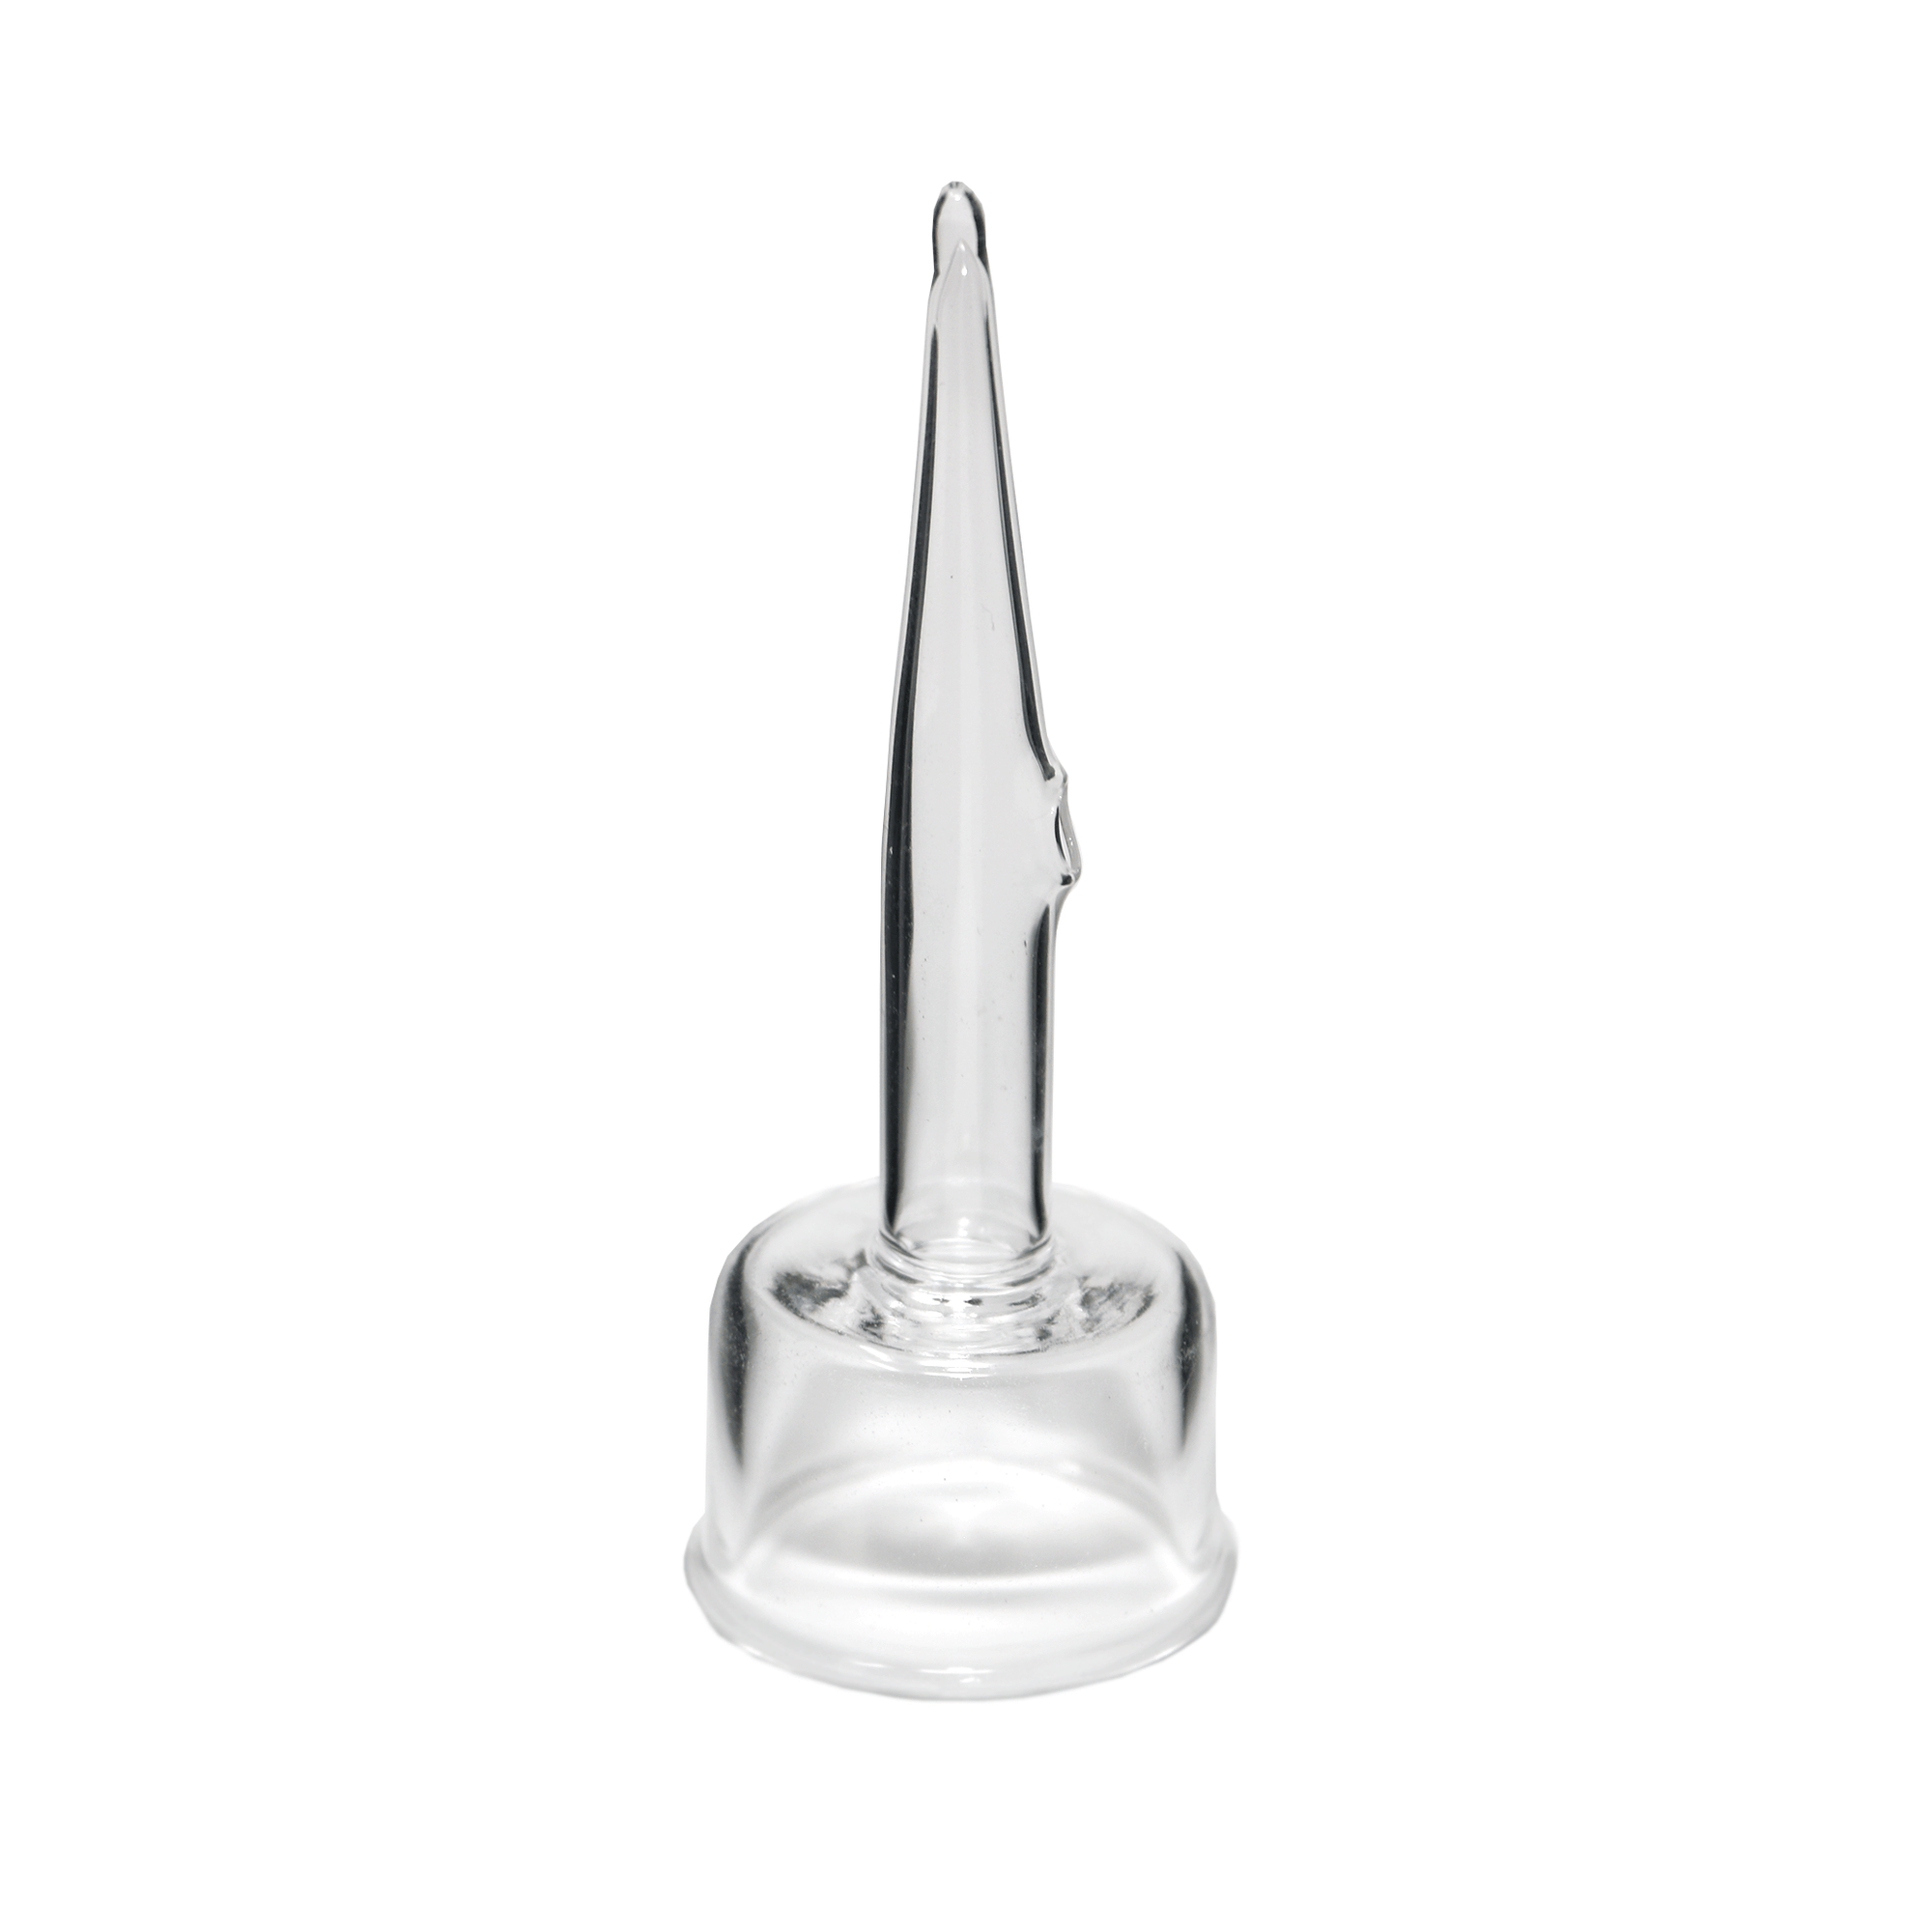 Carb Cap Dabber for Hybrid Nails | Angled Profile View | Dabbing Warehouse